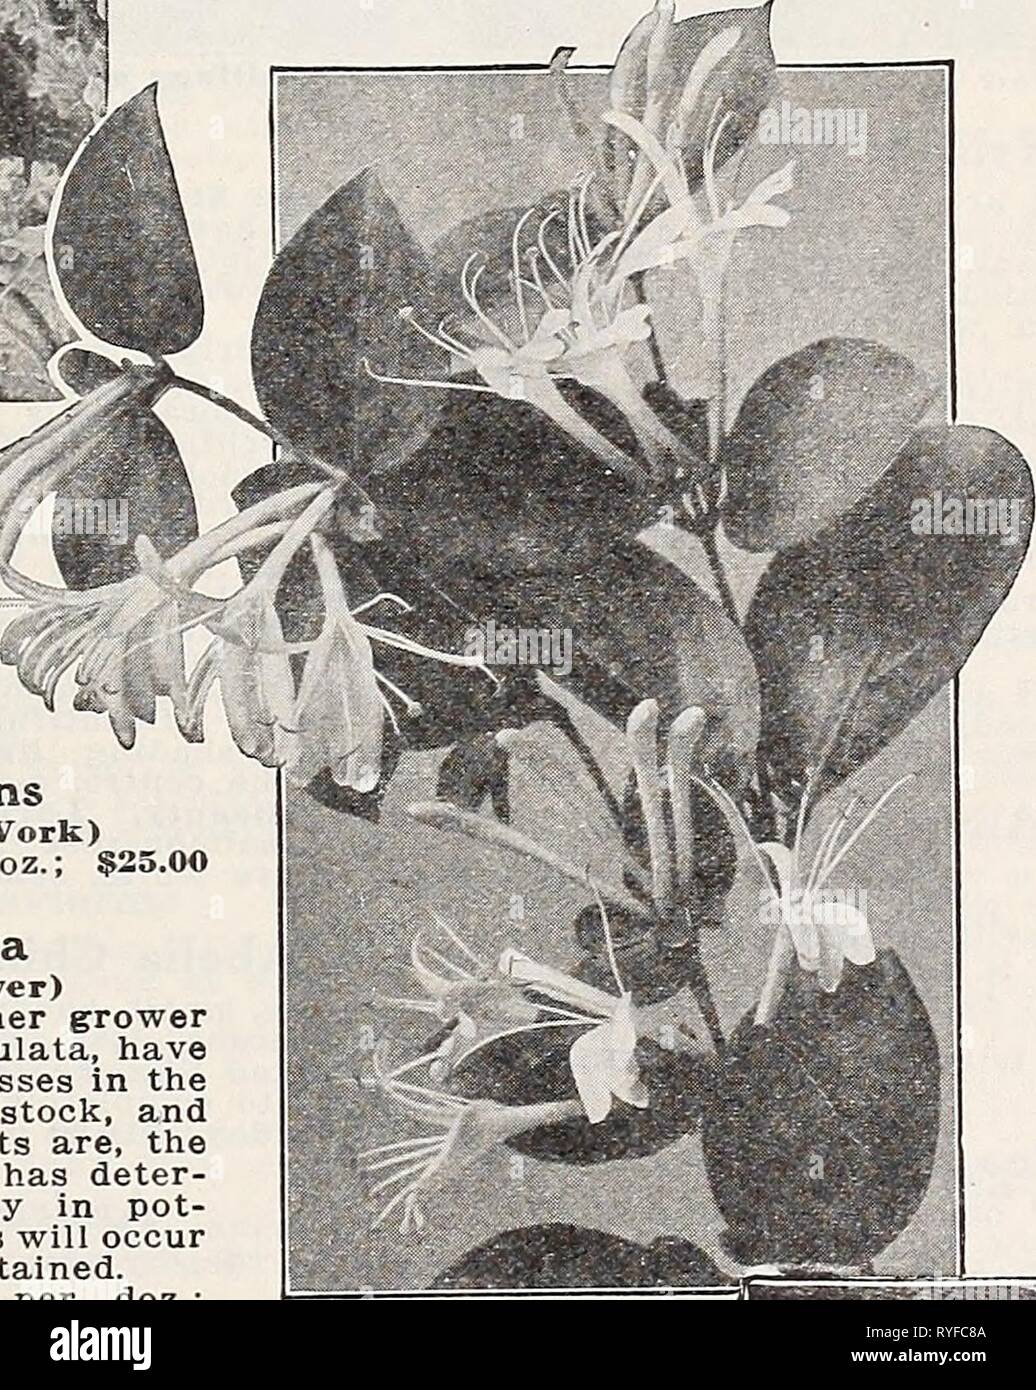 Dreer's wholesale price list for florists : special spring edition  dreerswholesalep1932henr 2 Year: 1932  Euonymus Bignonia (Trumpet Creeper) Grandiflora (True variety). GO cts. each; $0.00 per doz. Radicans. Strong plants. $2.50 per doz.; $20.00 per 100. Celastrus Scandens (Bitter Sweet or Wax Work) Strong plants, $3.50 per doz.; $25.00 per 100. Clematis Paniculata (Japanese Virgin's Bower) We, and no doubt every other grower and planter of Clematis Paniculata, have frequently met with serious losses in the transplanting of field-grown stock, and the larger and older the plants are, the more Stock Photo